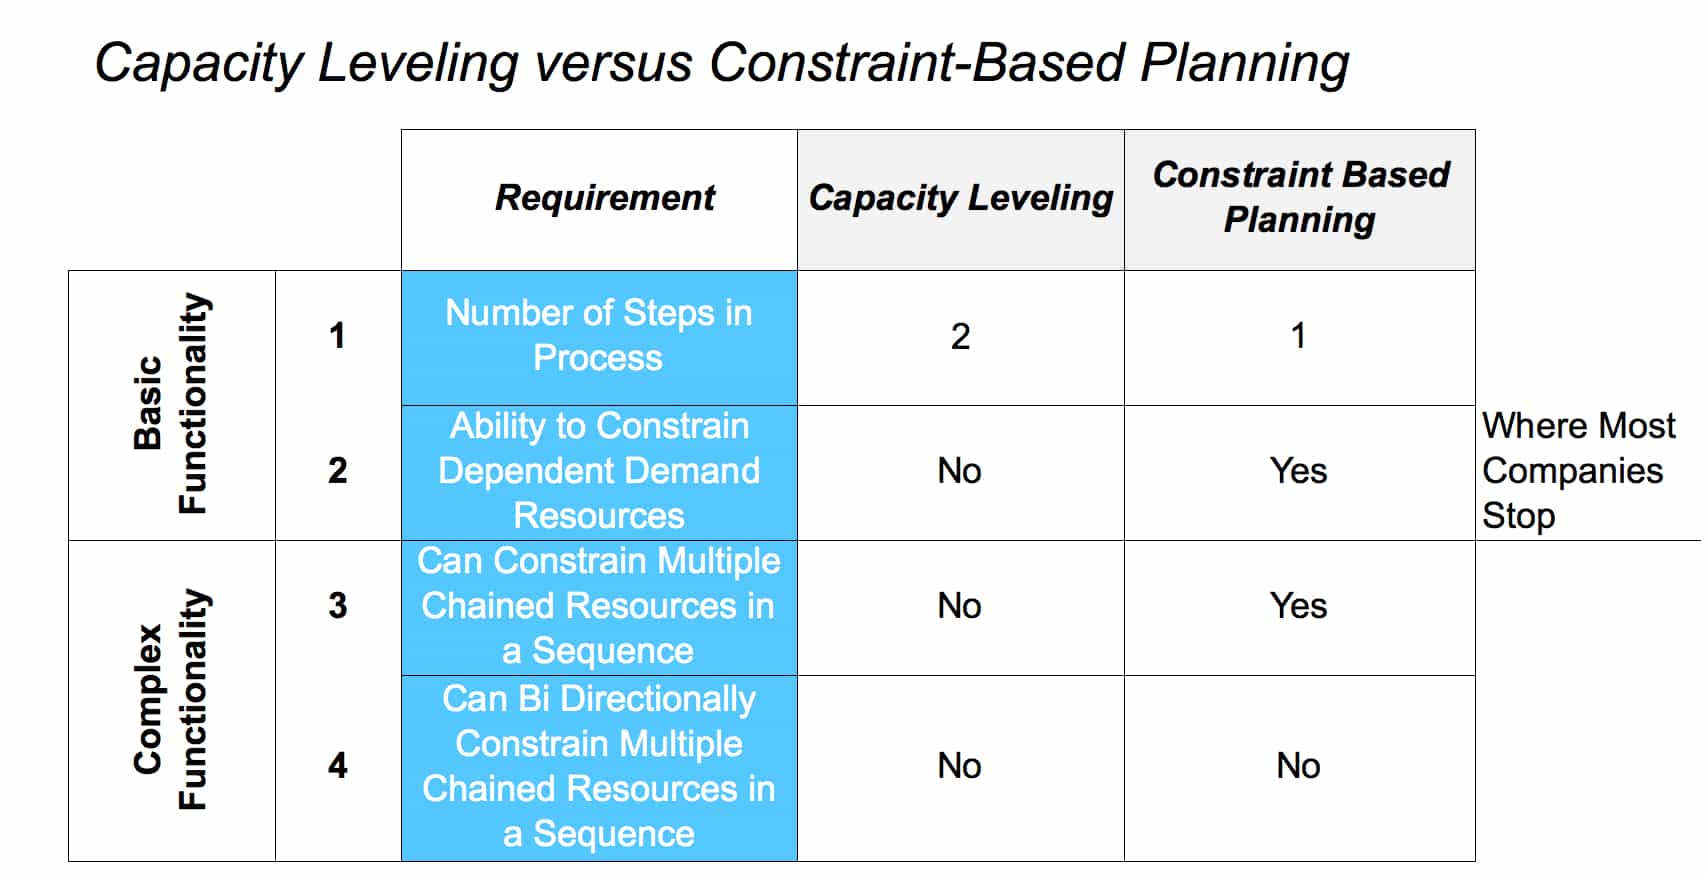 Production Planning With Constraints Versus Capacity Leveling Definition Brightwork Research Analysis